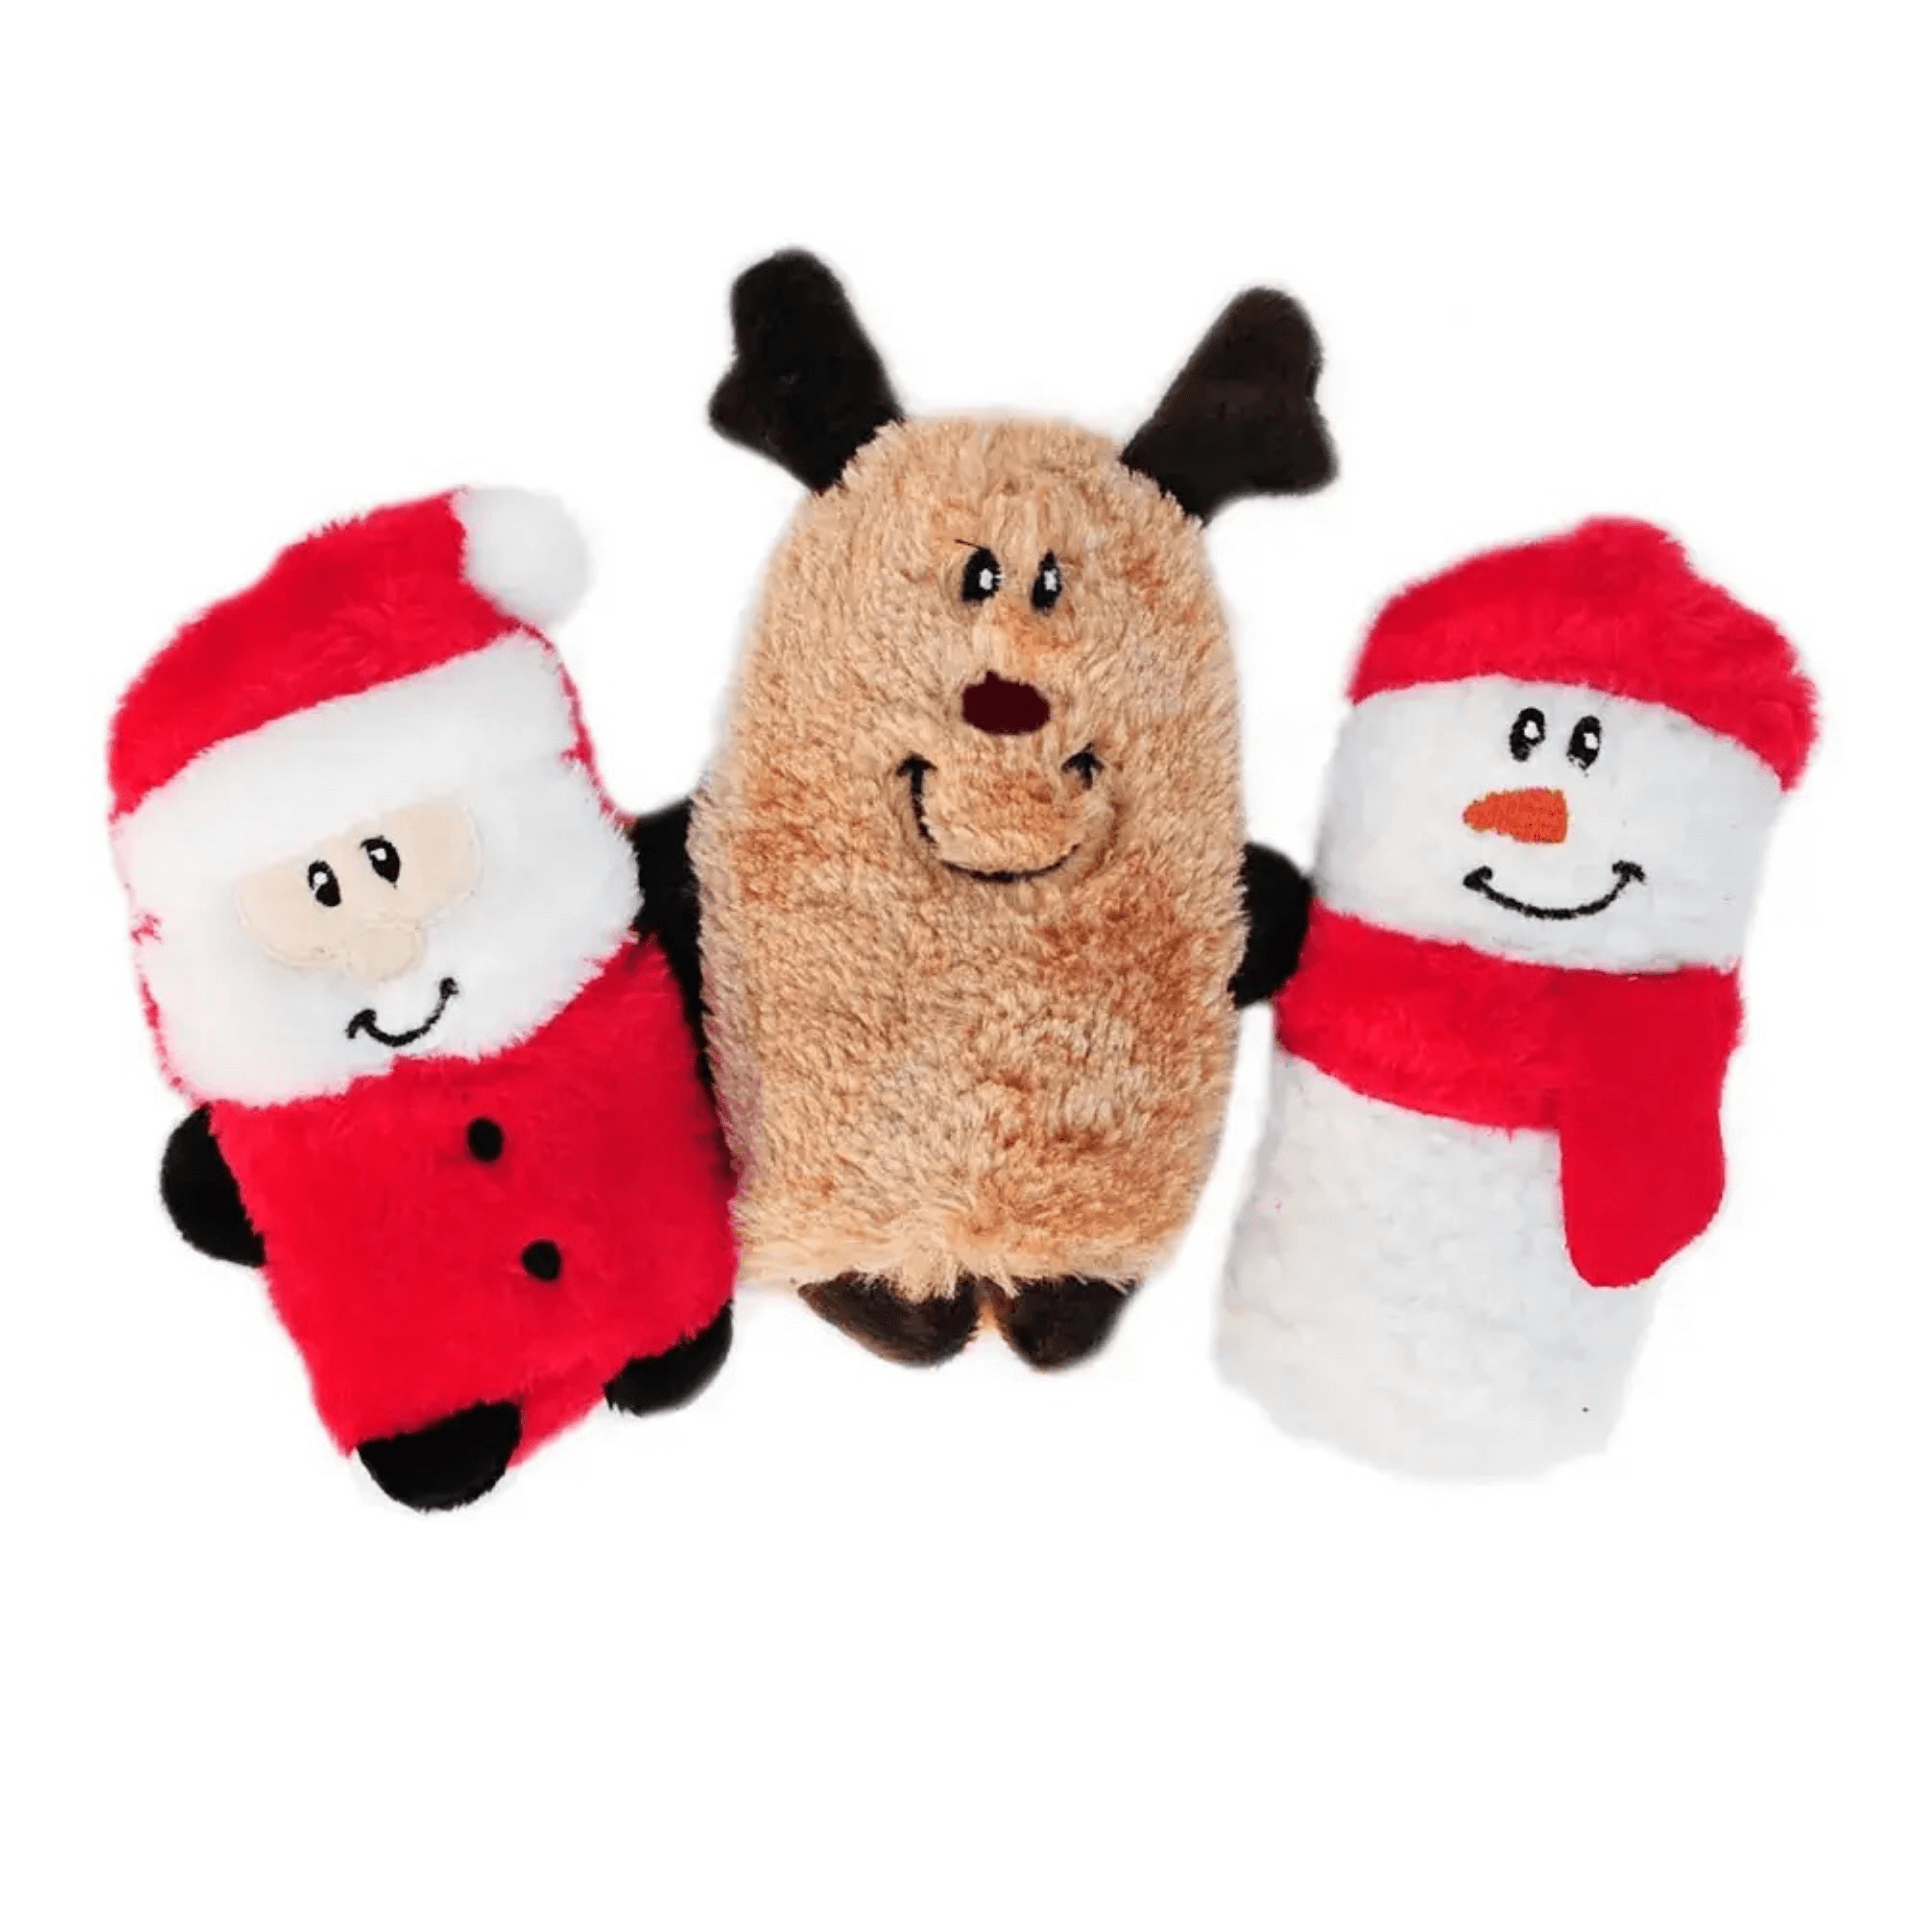 Plush squeaker dog toy Let's Pawty for your furbaby